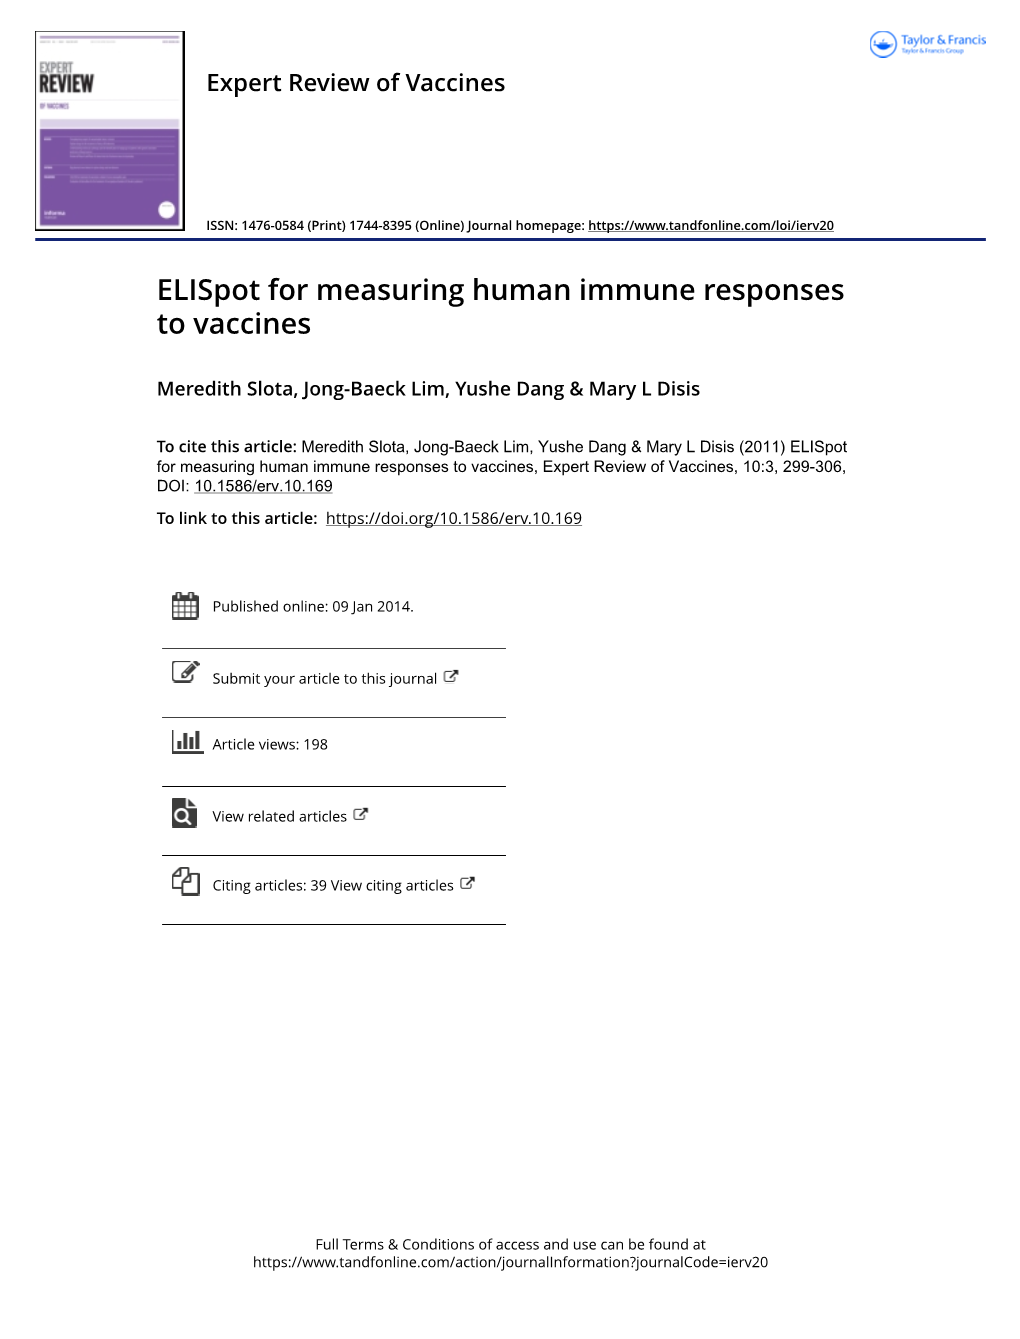 Elispot for Measuring Human Immune Responses to Vaccines